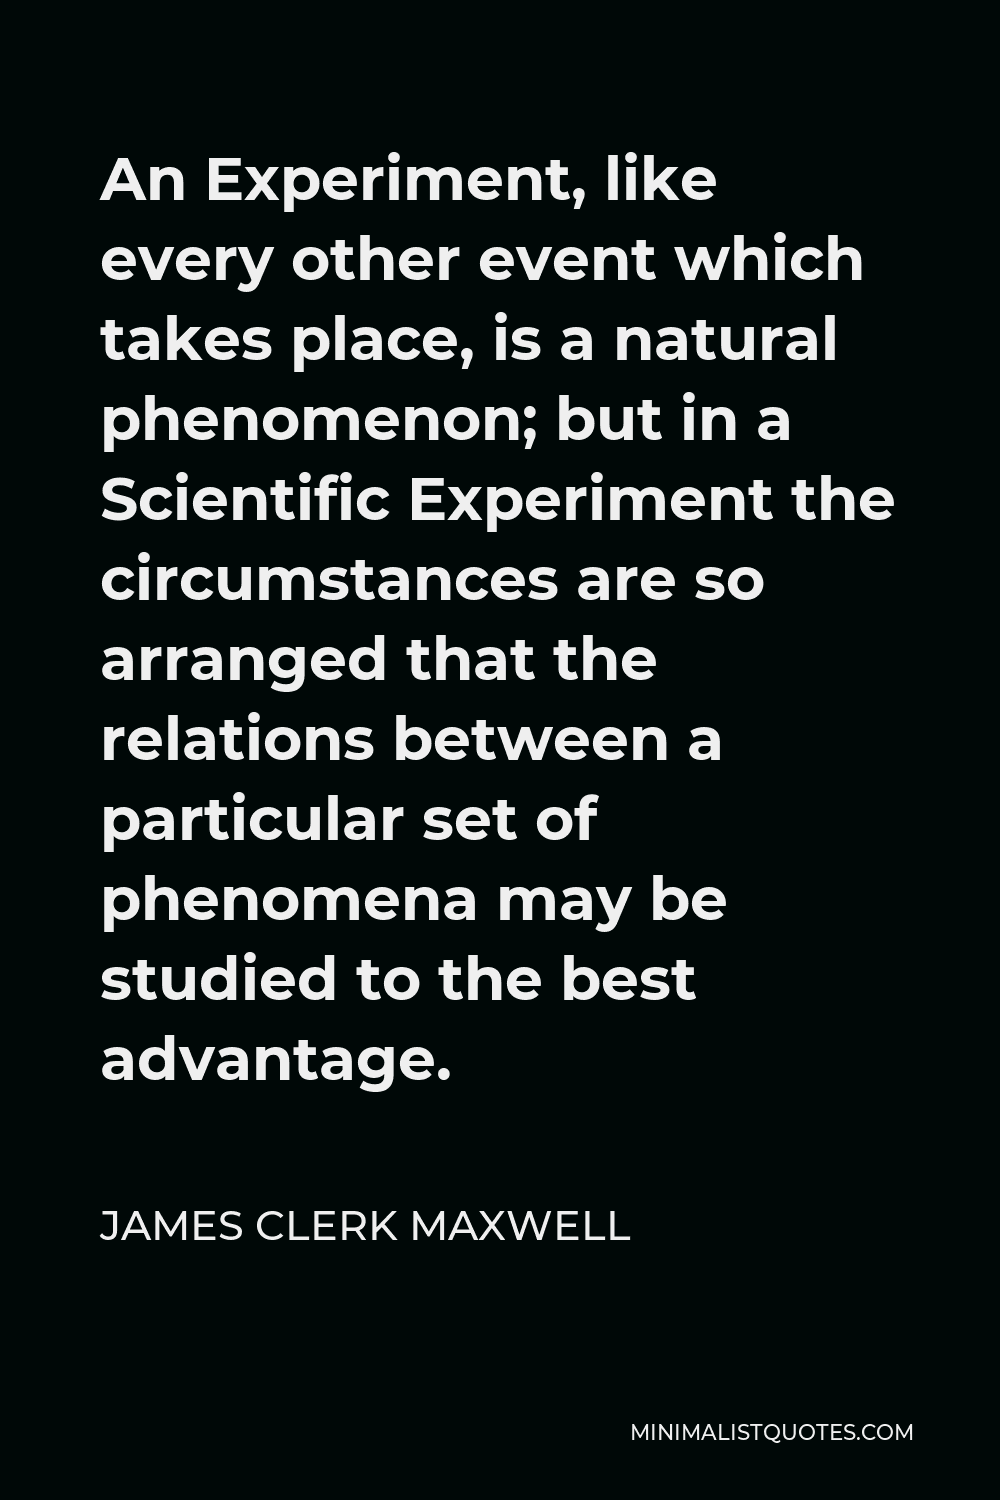 James Clerk Maxwell Quote - An Experiment, like every other event which takes place, is a natural phenomenon; but in a Scientific Experiment the circumstances are so arranged that the relations between a particular set of phenomena may be studied to the best advantage.